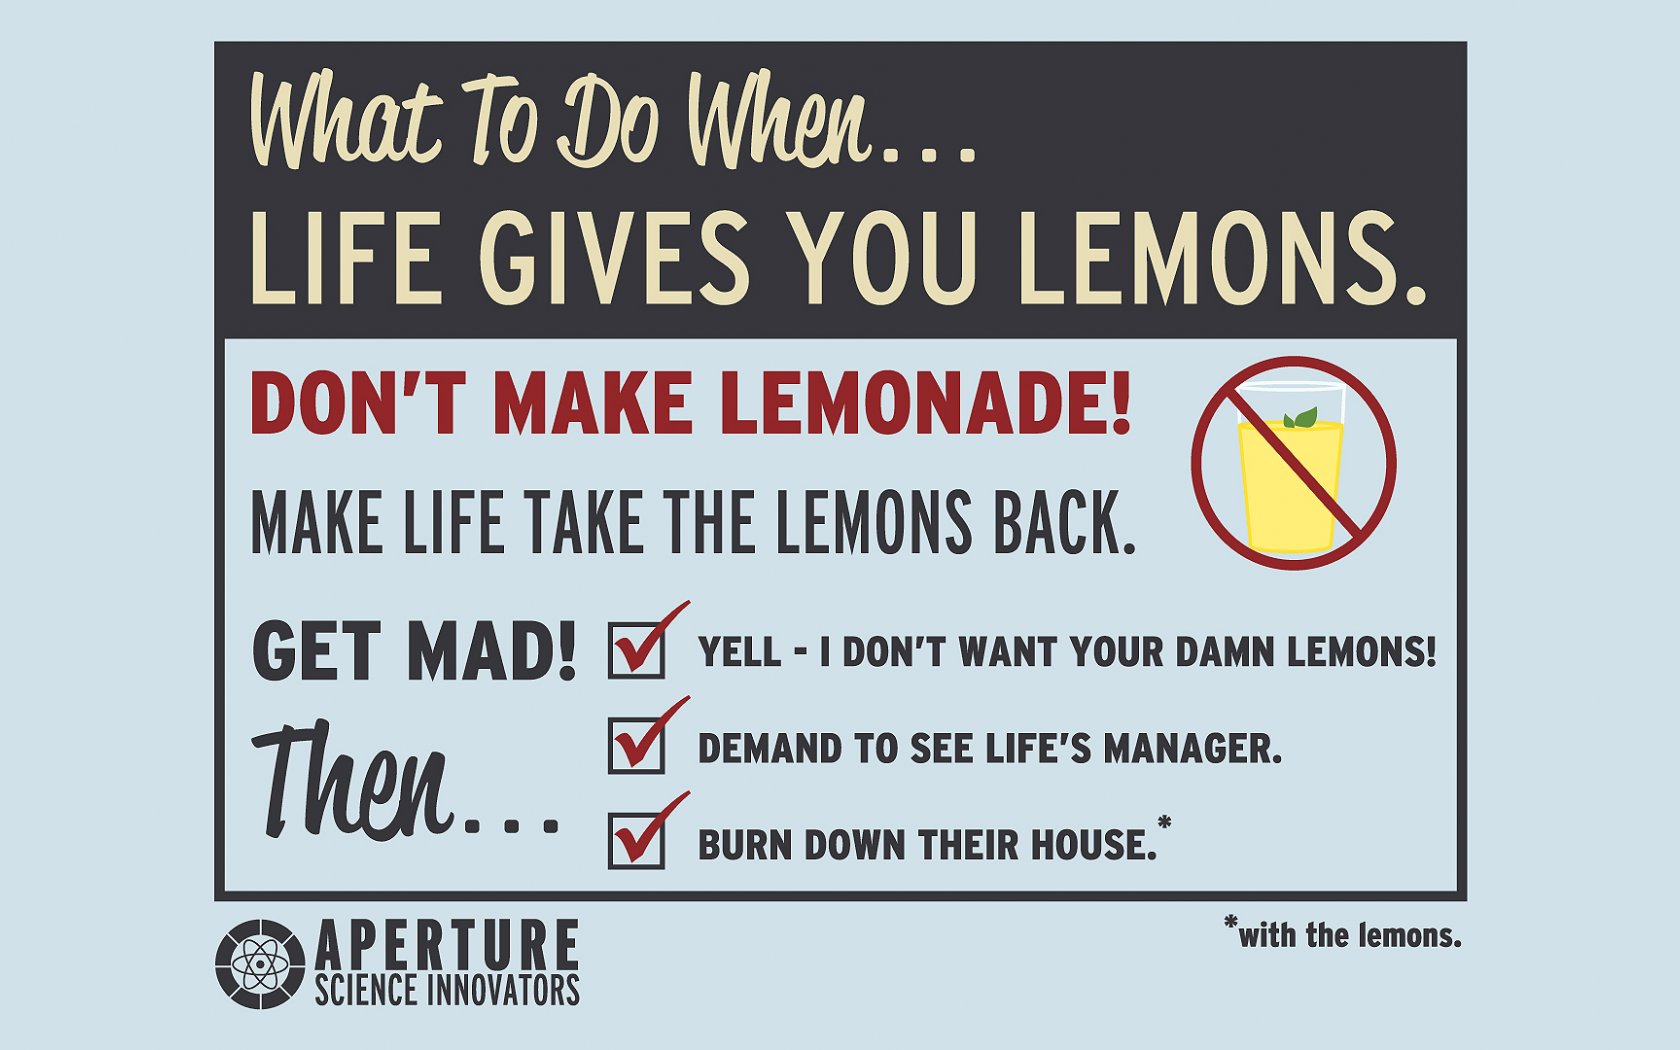 When Life Gives You Lemons   Free Images At Clker Com   Vector Clip    